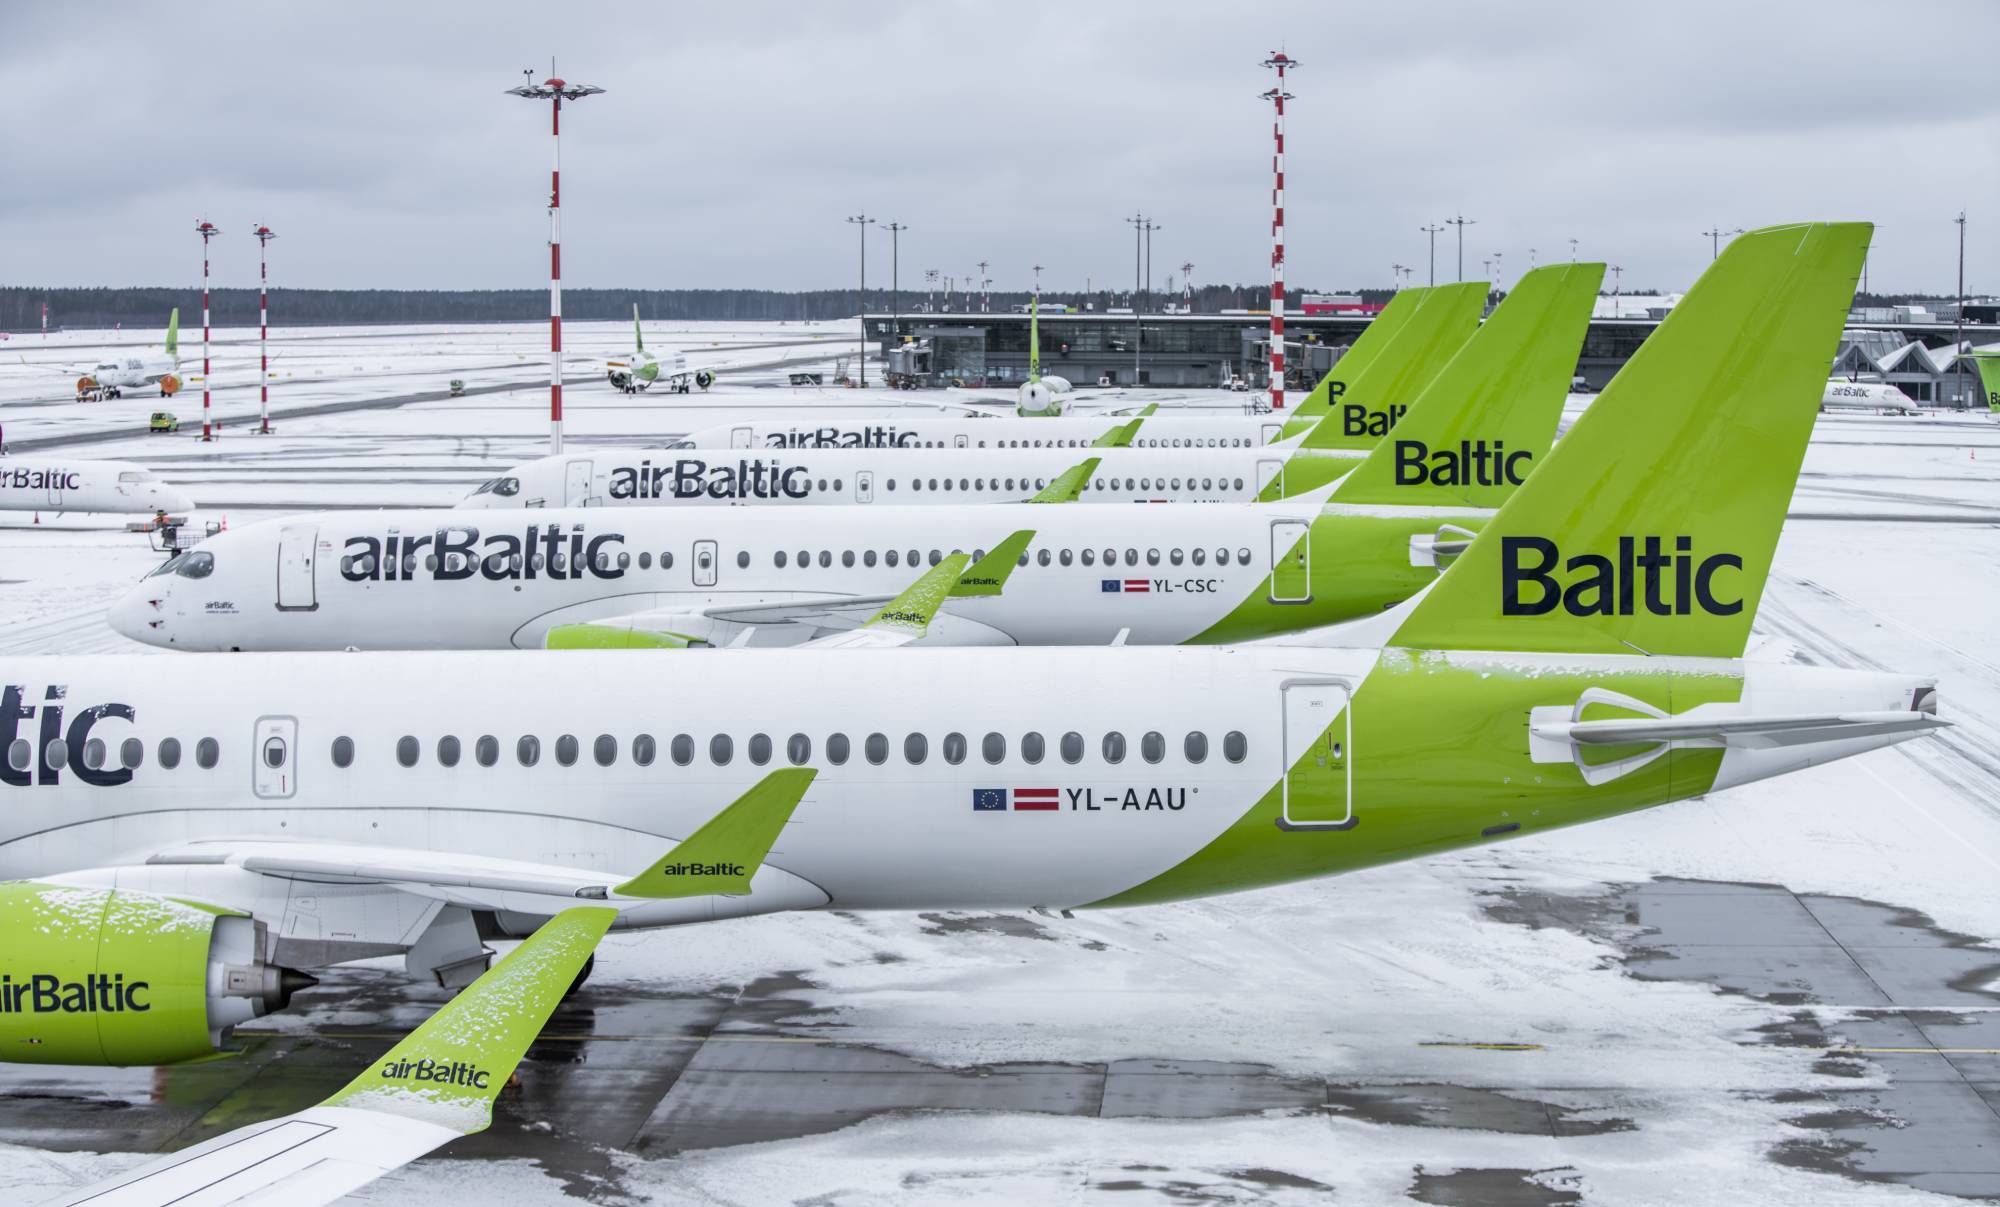 Investigation of the activity of national airline company airBaltic is being initiated. Part 1